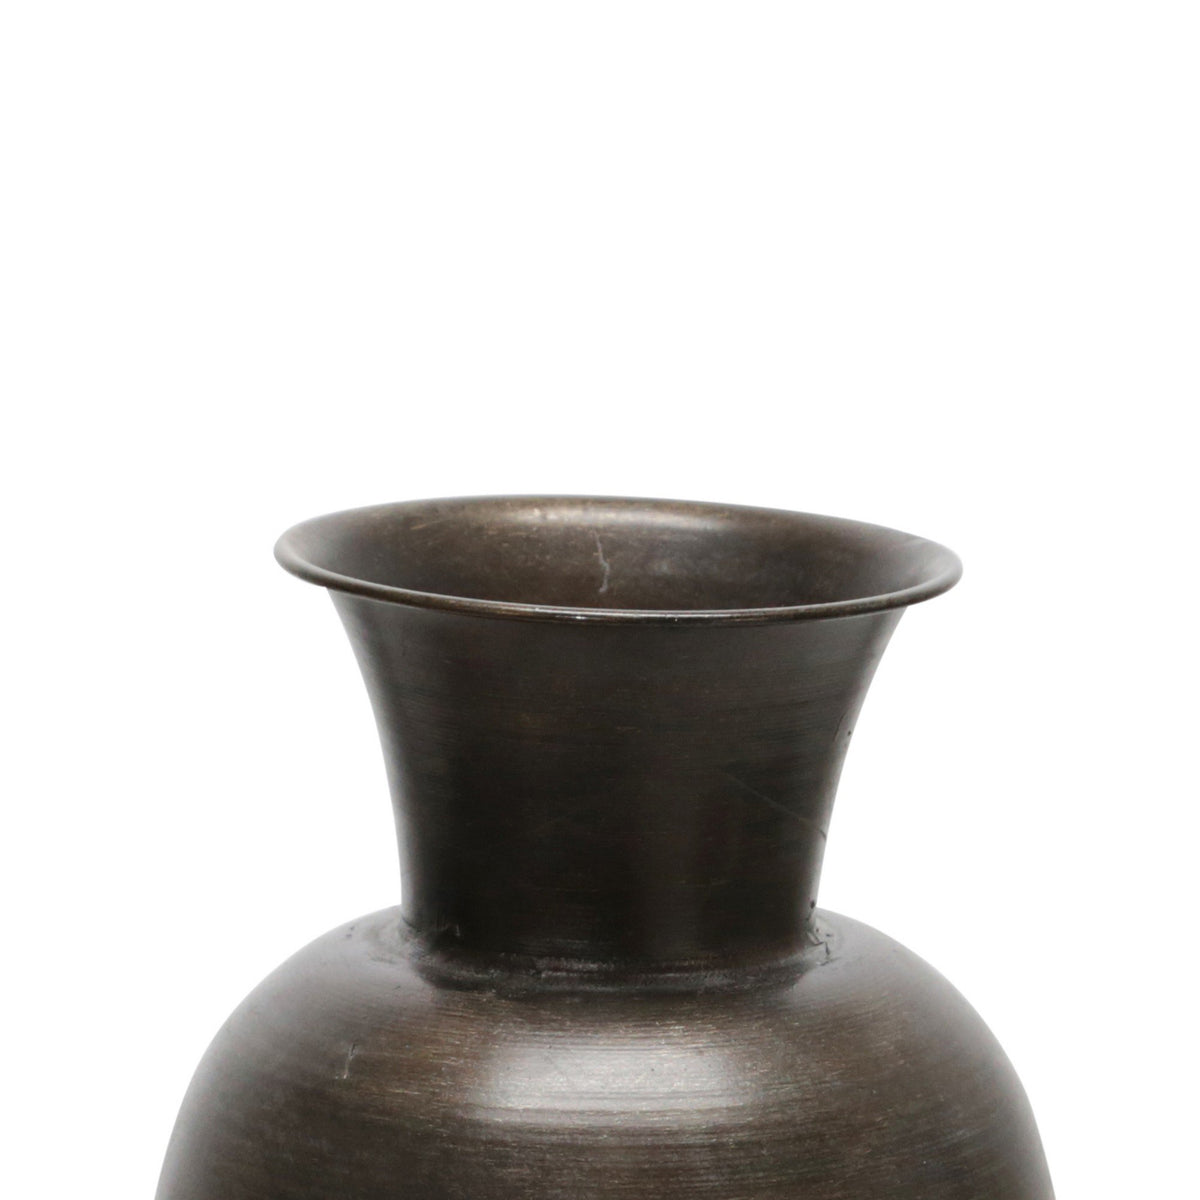 15 Inch Metal Jar with Wooden Accent and Flared Opening,Black and Brown - BM221171